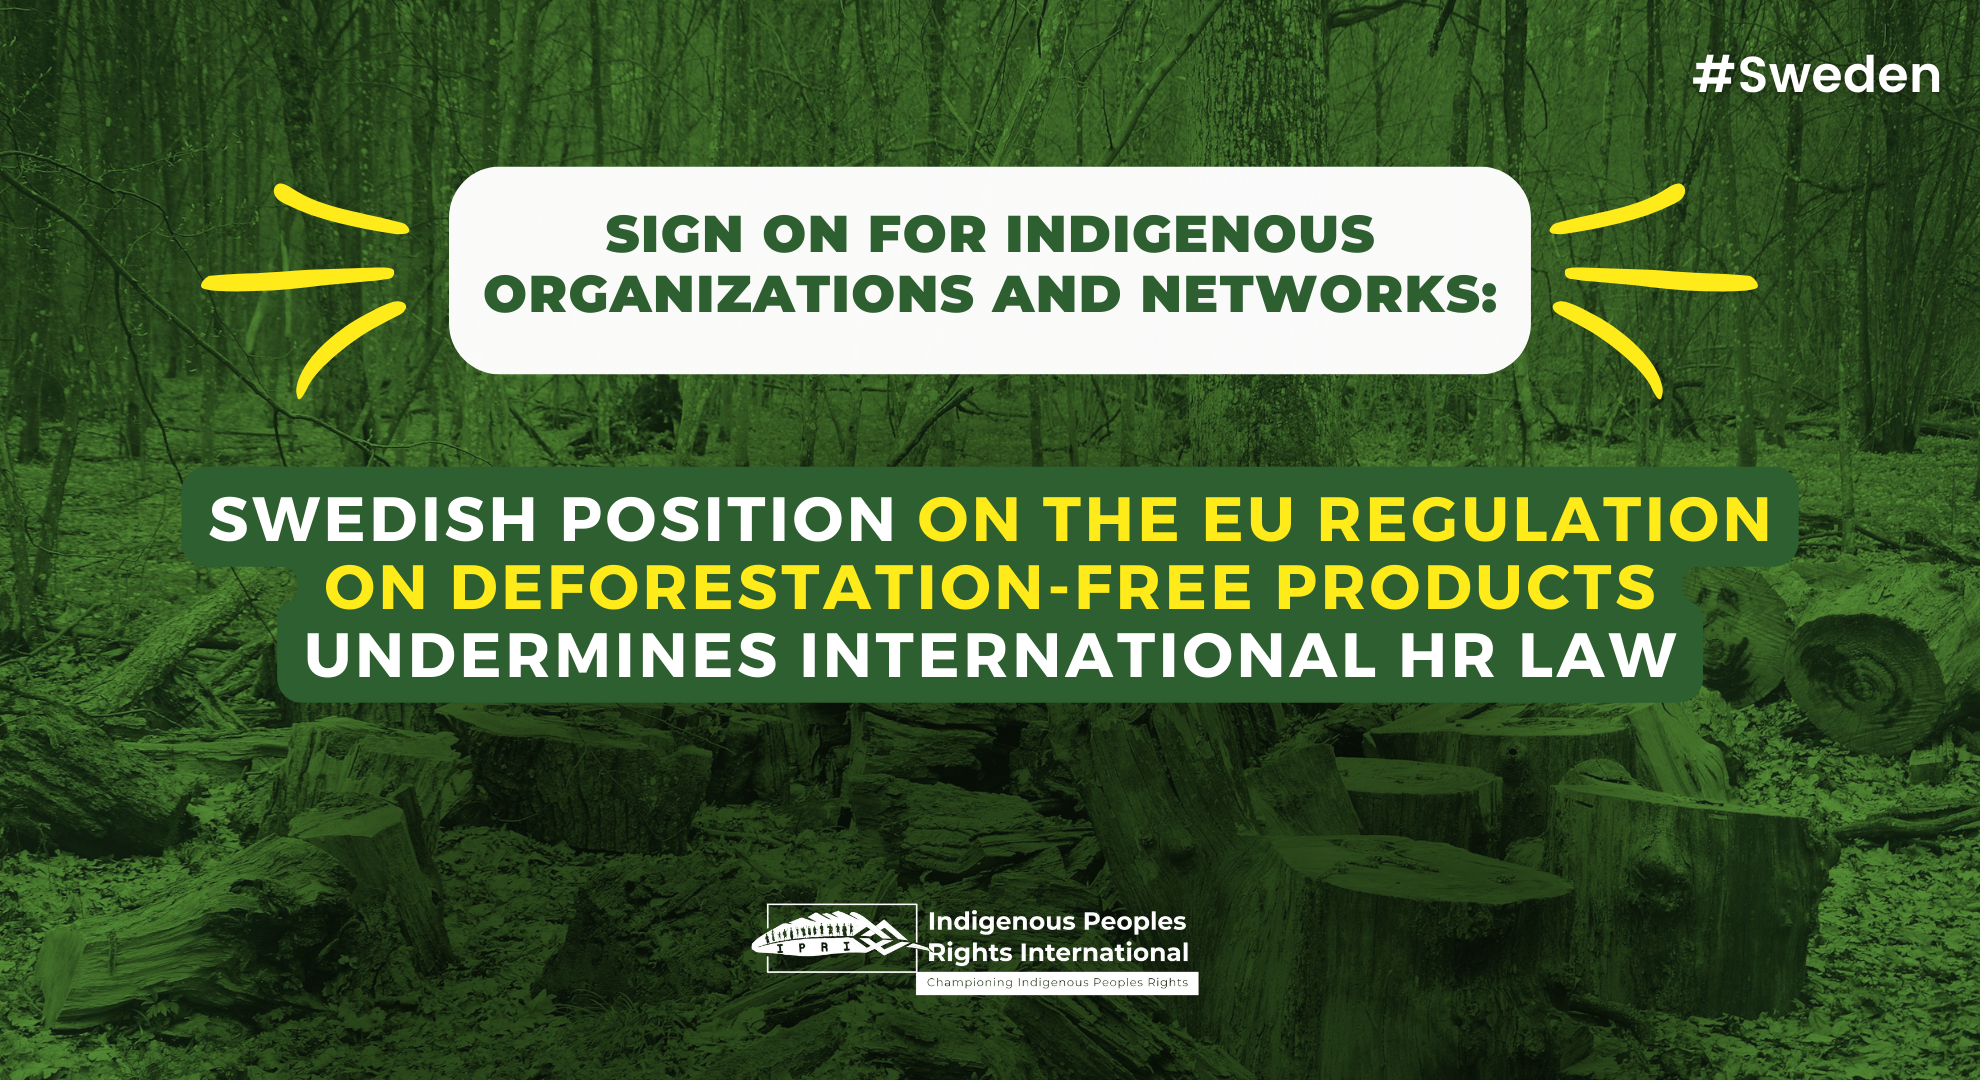 SWEDEN: Sign on For Indigenous Organizations and Networks: Re Swedish position on the EU Regulation on Deforestation-free Products undermines int'l HR law